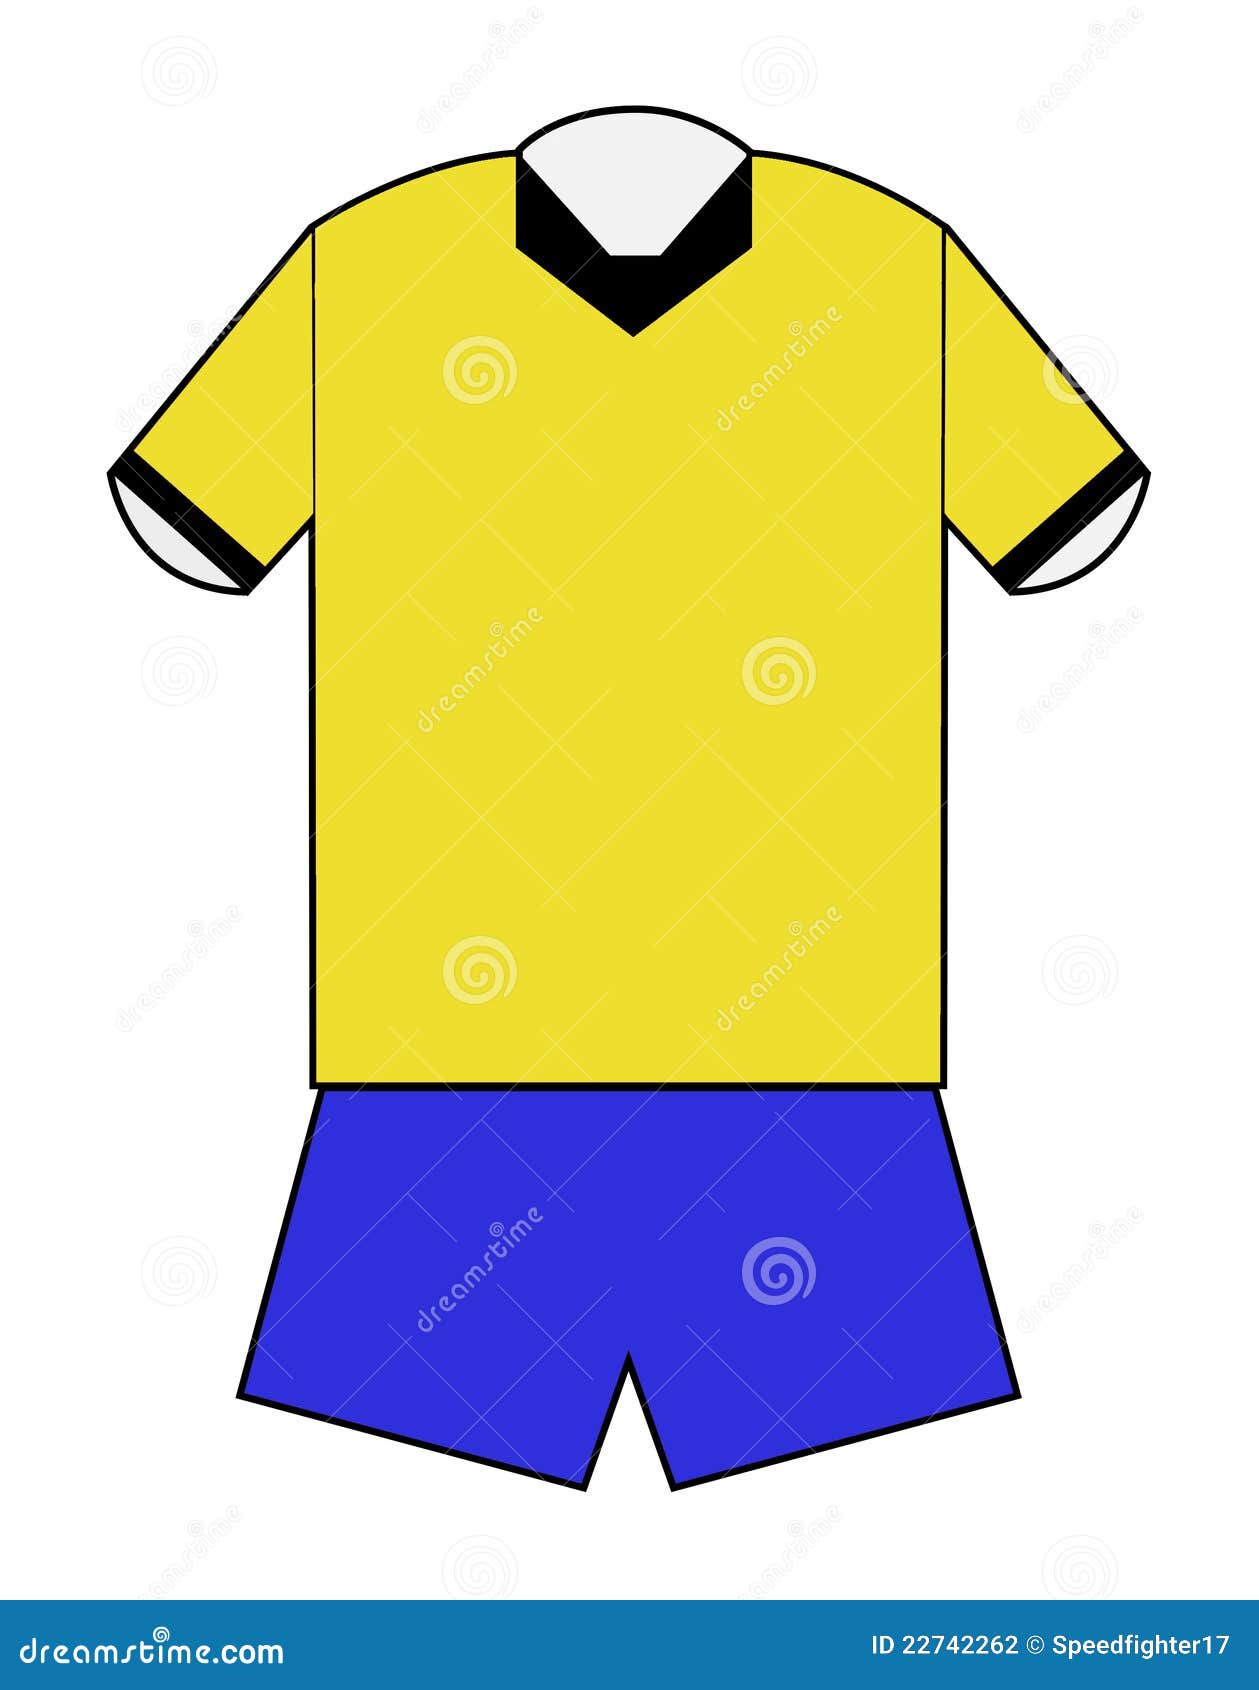 Blank Football Or Soccer Kit Stock Photography - Image: 22742262